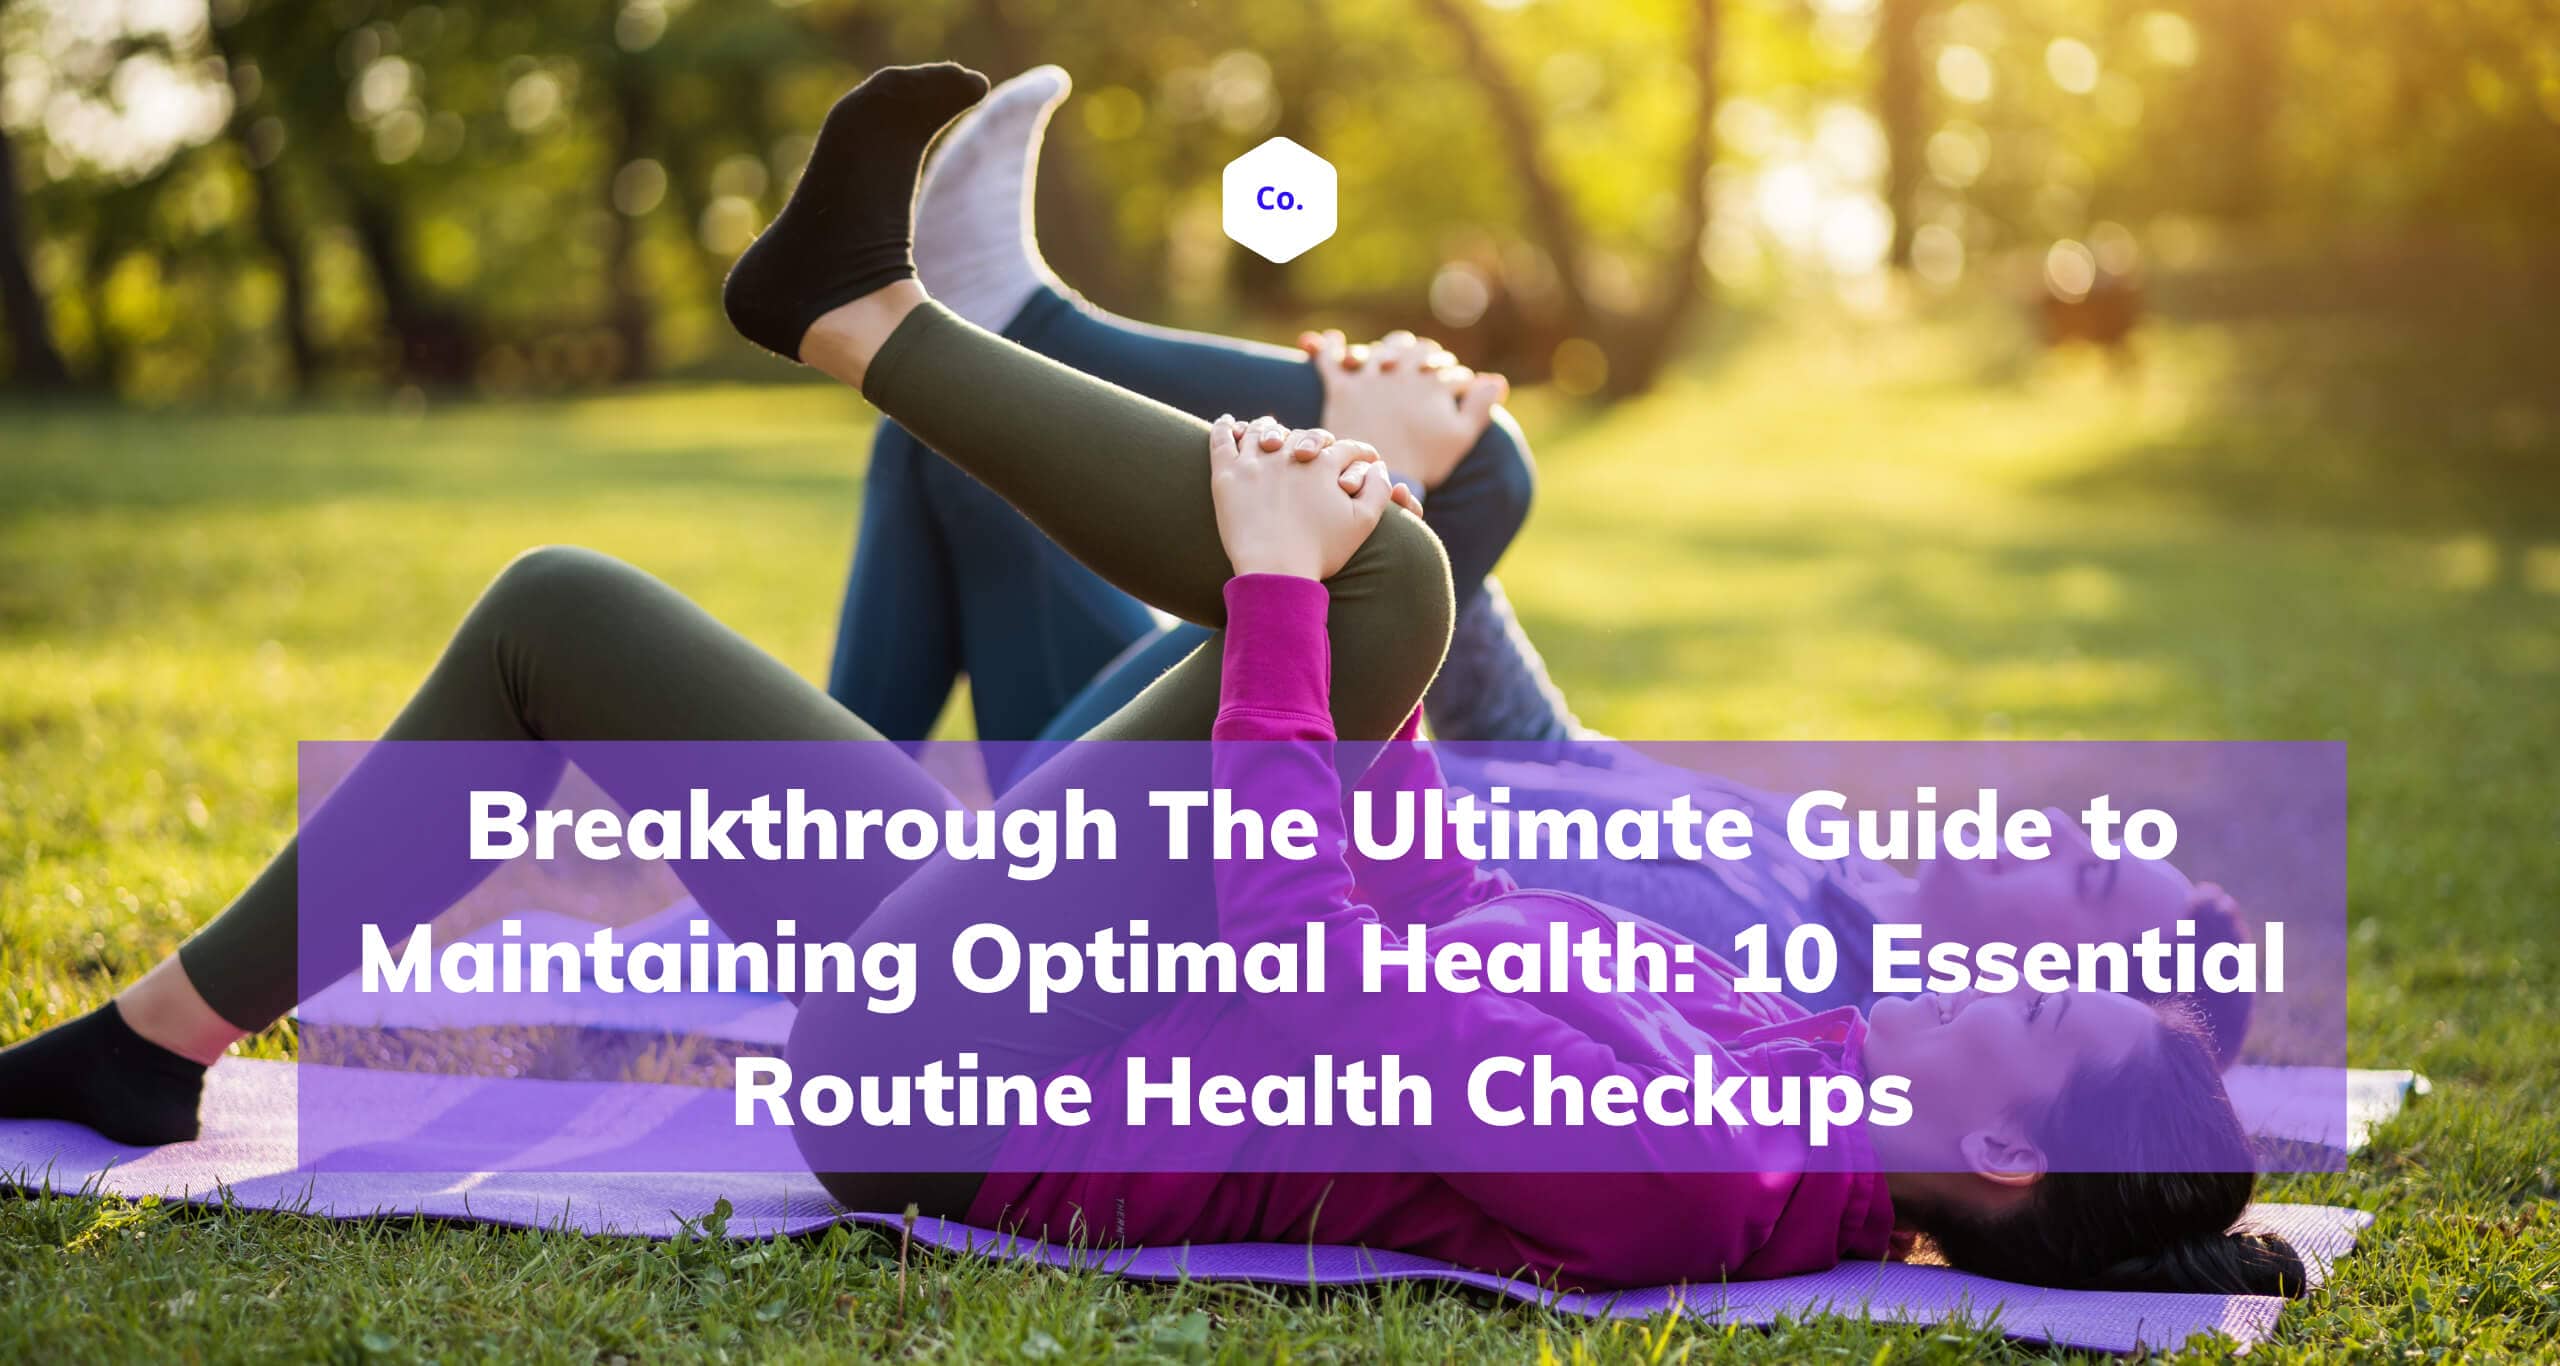 The Ultimate Guide to Maintaining Optimal Health: 10 Essential Checkups